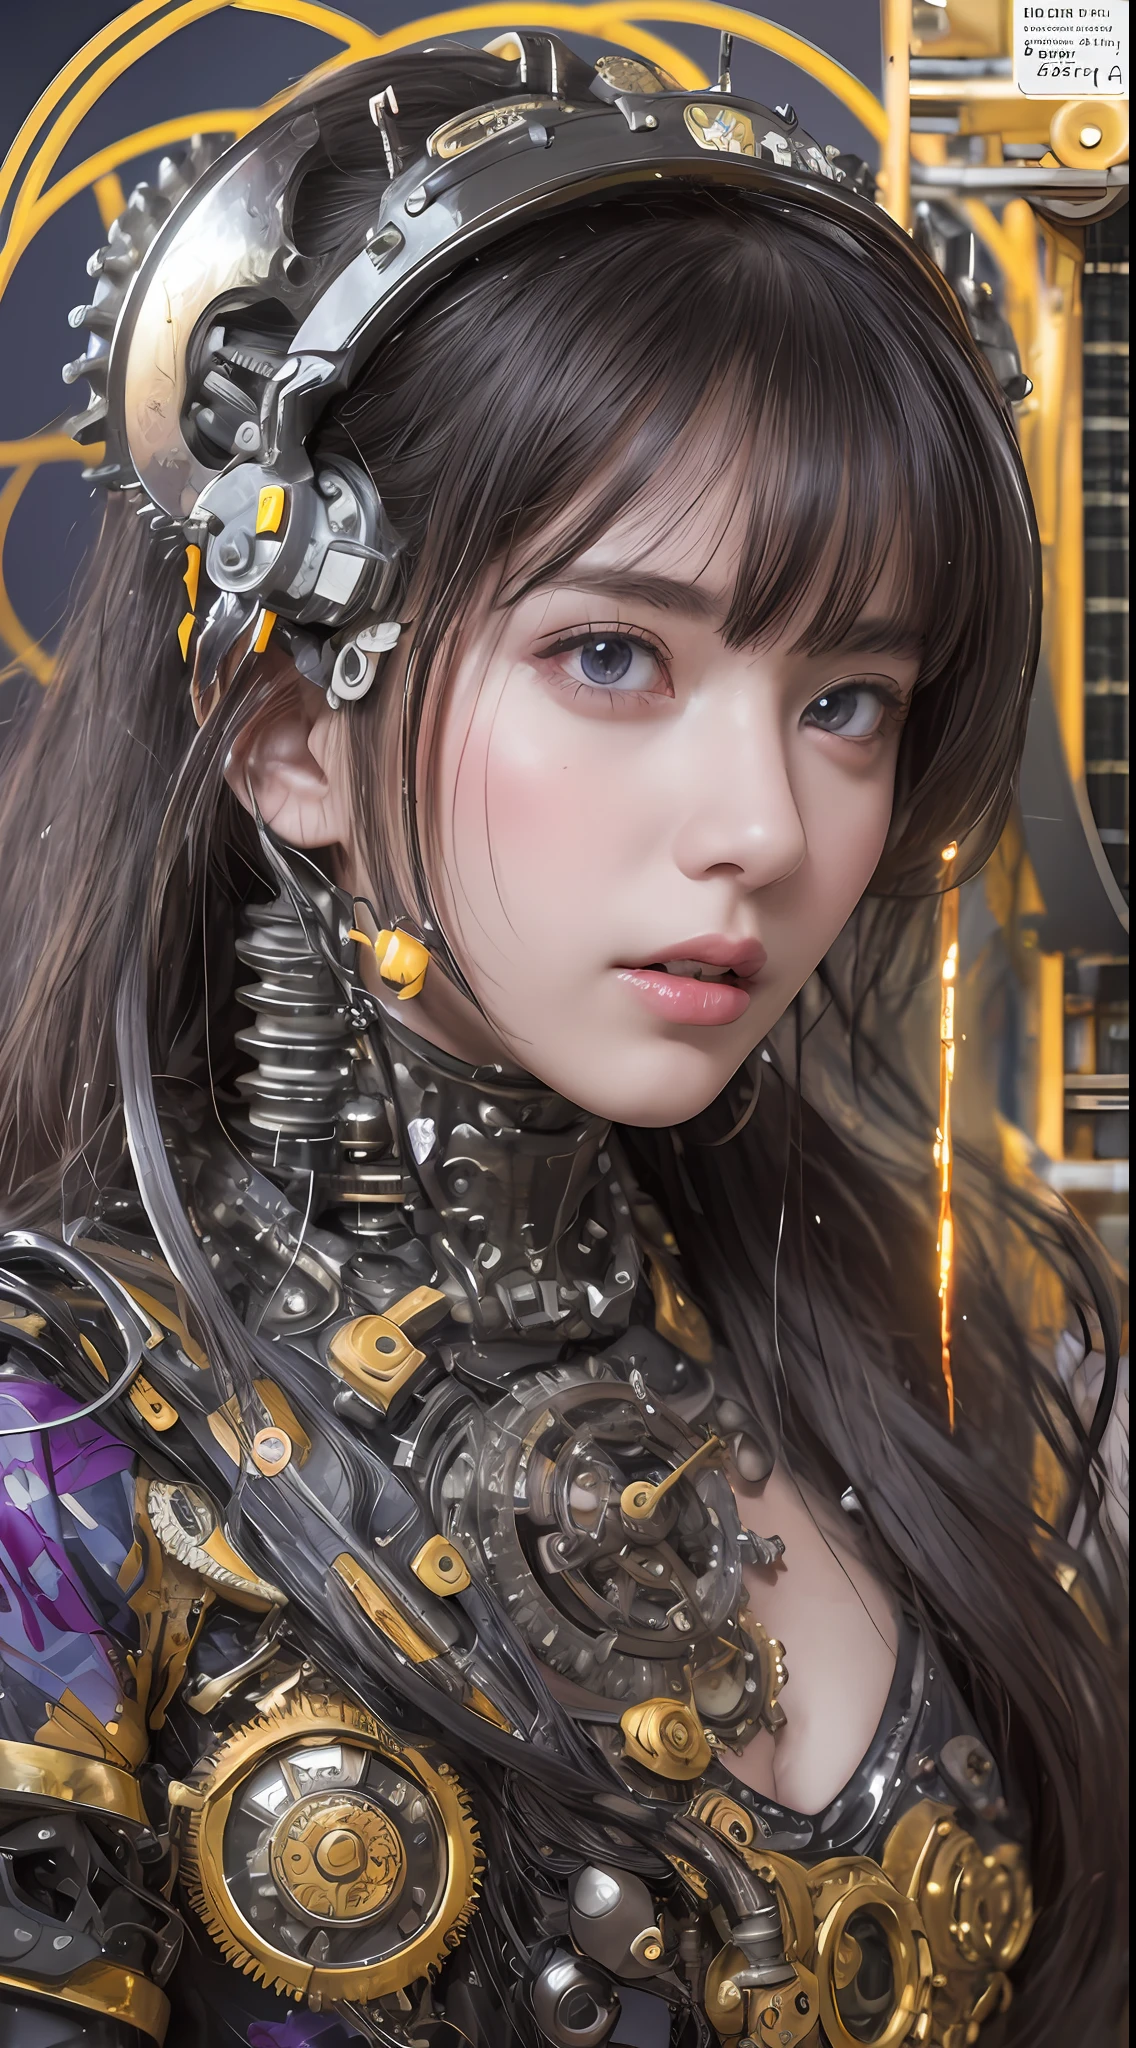 Top Quality, Masterpiece, Ultra High Resolution, (Photorealistic: 1.4), Raw Photo, 1 Girl, Black Hair, Glossy Skin, 1 Mechanical Girl, (Ultra Realistic Details)), Portrait, Global Illumination, Shadows, Octane Rendering, 8K, Ultra Sharp, Big, Cleavage Exposed Raw Skin, Metal, Detail of Intricate Ornaments, steampunk details, vacuum tubes, nixie tubes, oil pressure gauges, glass tubes, analog meters, gears, gears, golden hydraulic cylinders, very intricate details, realistic light, CGSoation trends, purple eyes, glowing eyes, facing the camera, neon details, mechanical limbs, blood vessels connected to tubes, mechanical vertebrae attached to the back, mechanical cervical attachment to the neck, sitting, wires and cables connecting to the head, Gundam, small LED lamps,